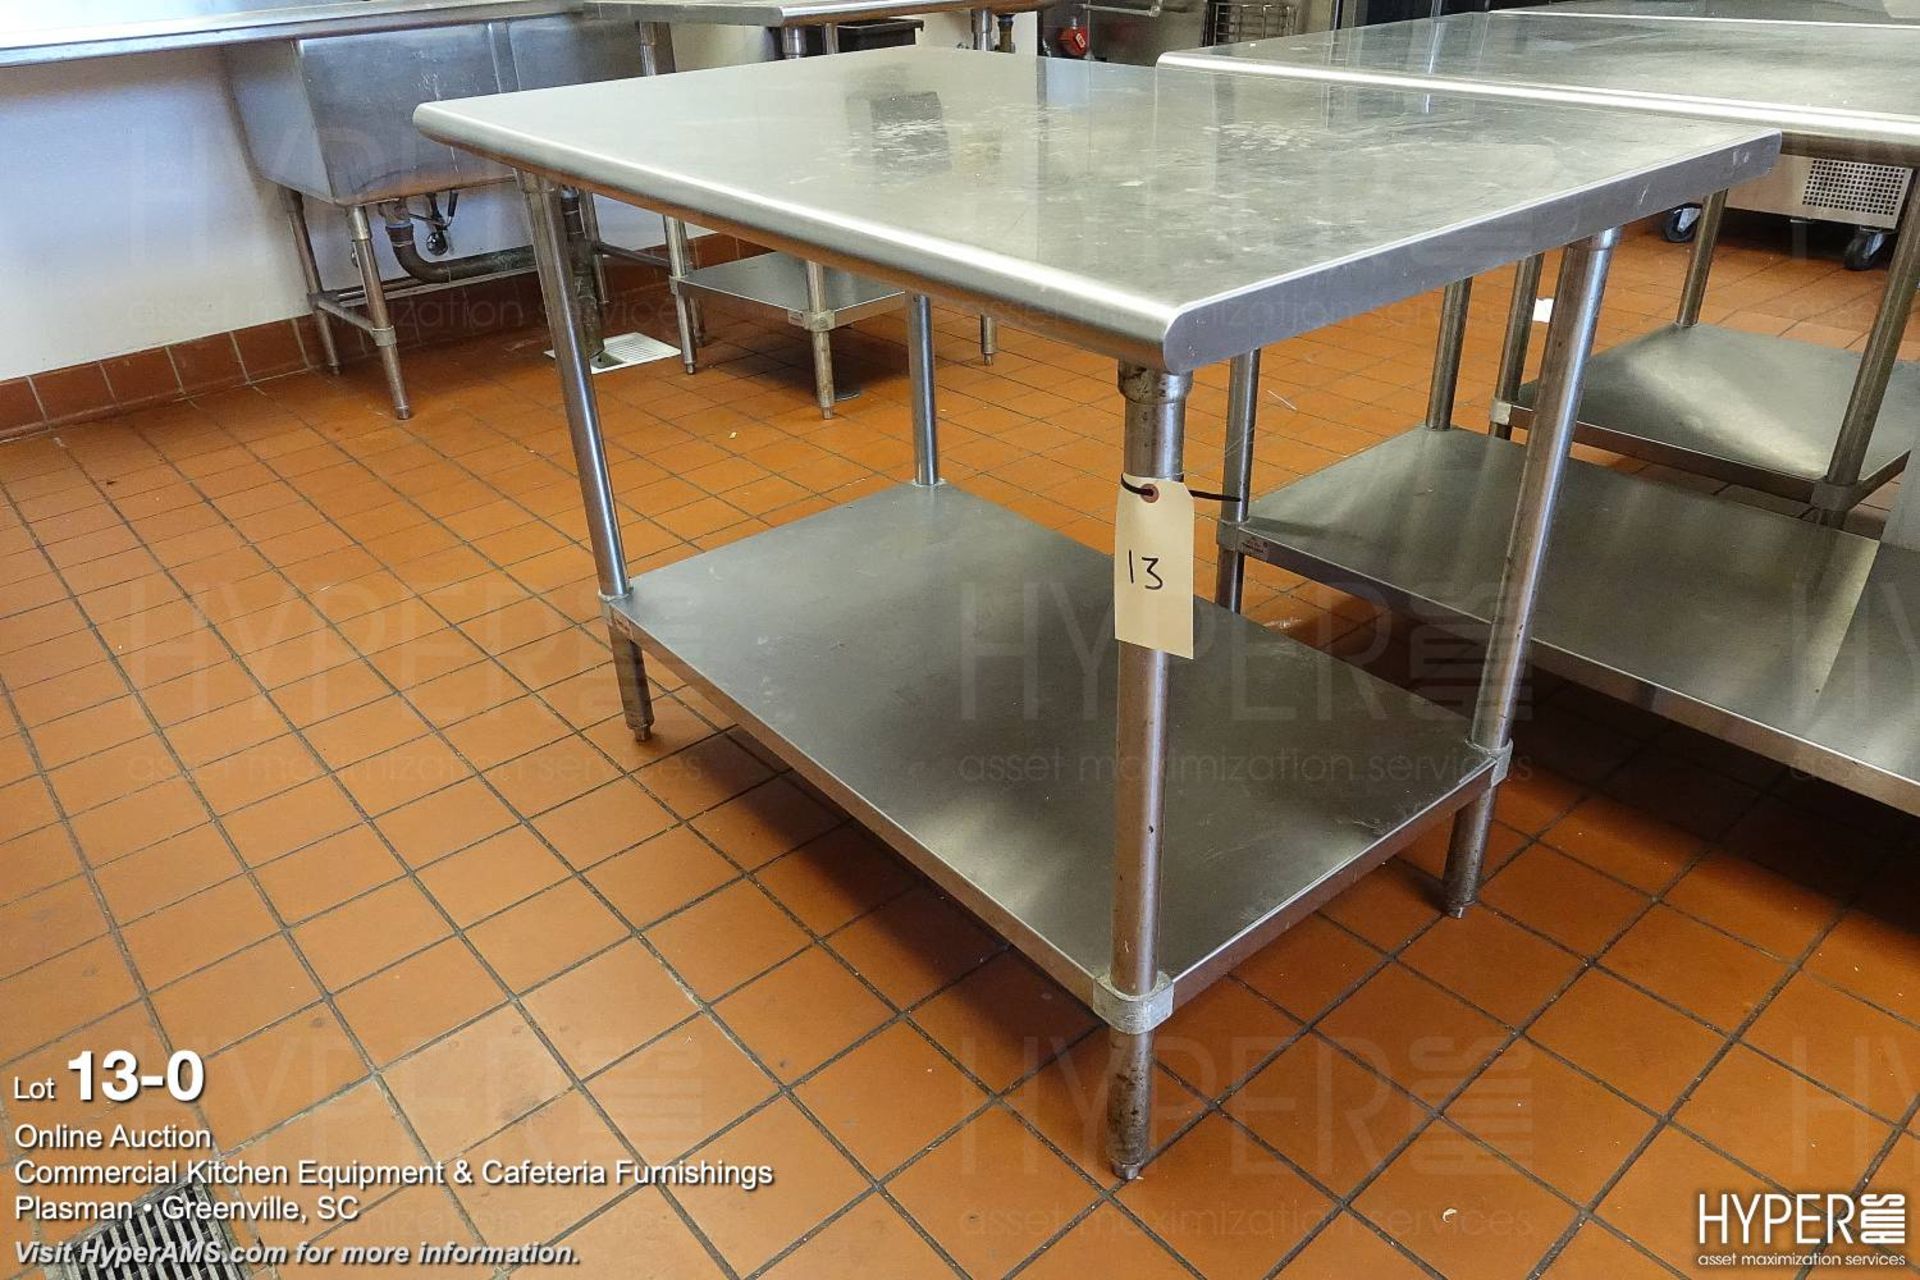 Stainless steel work table 30" x 48"